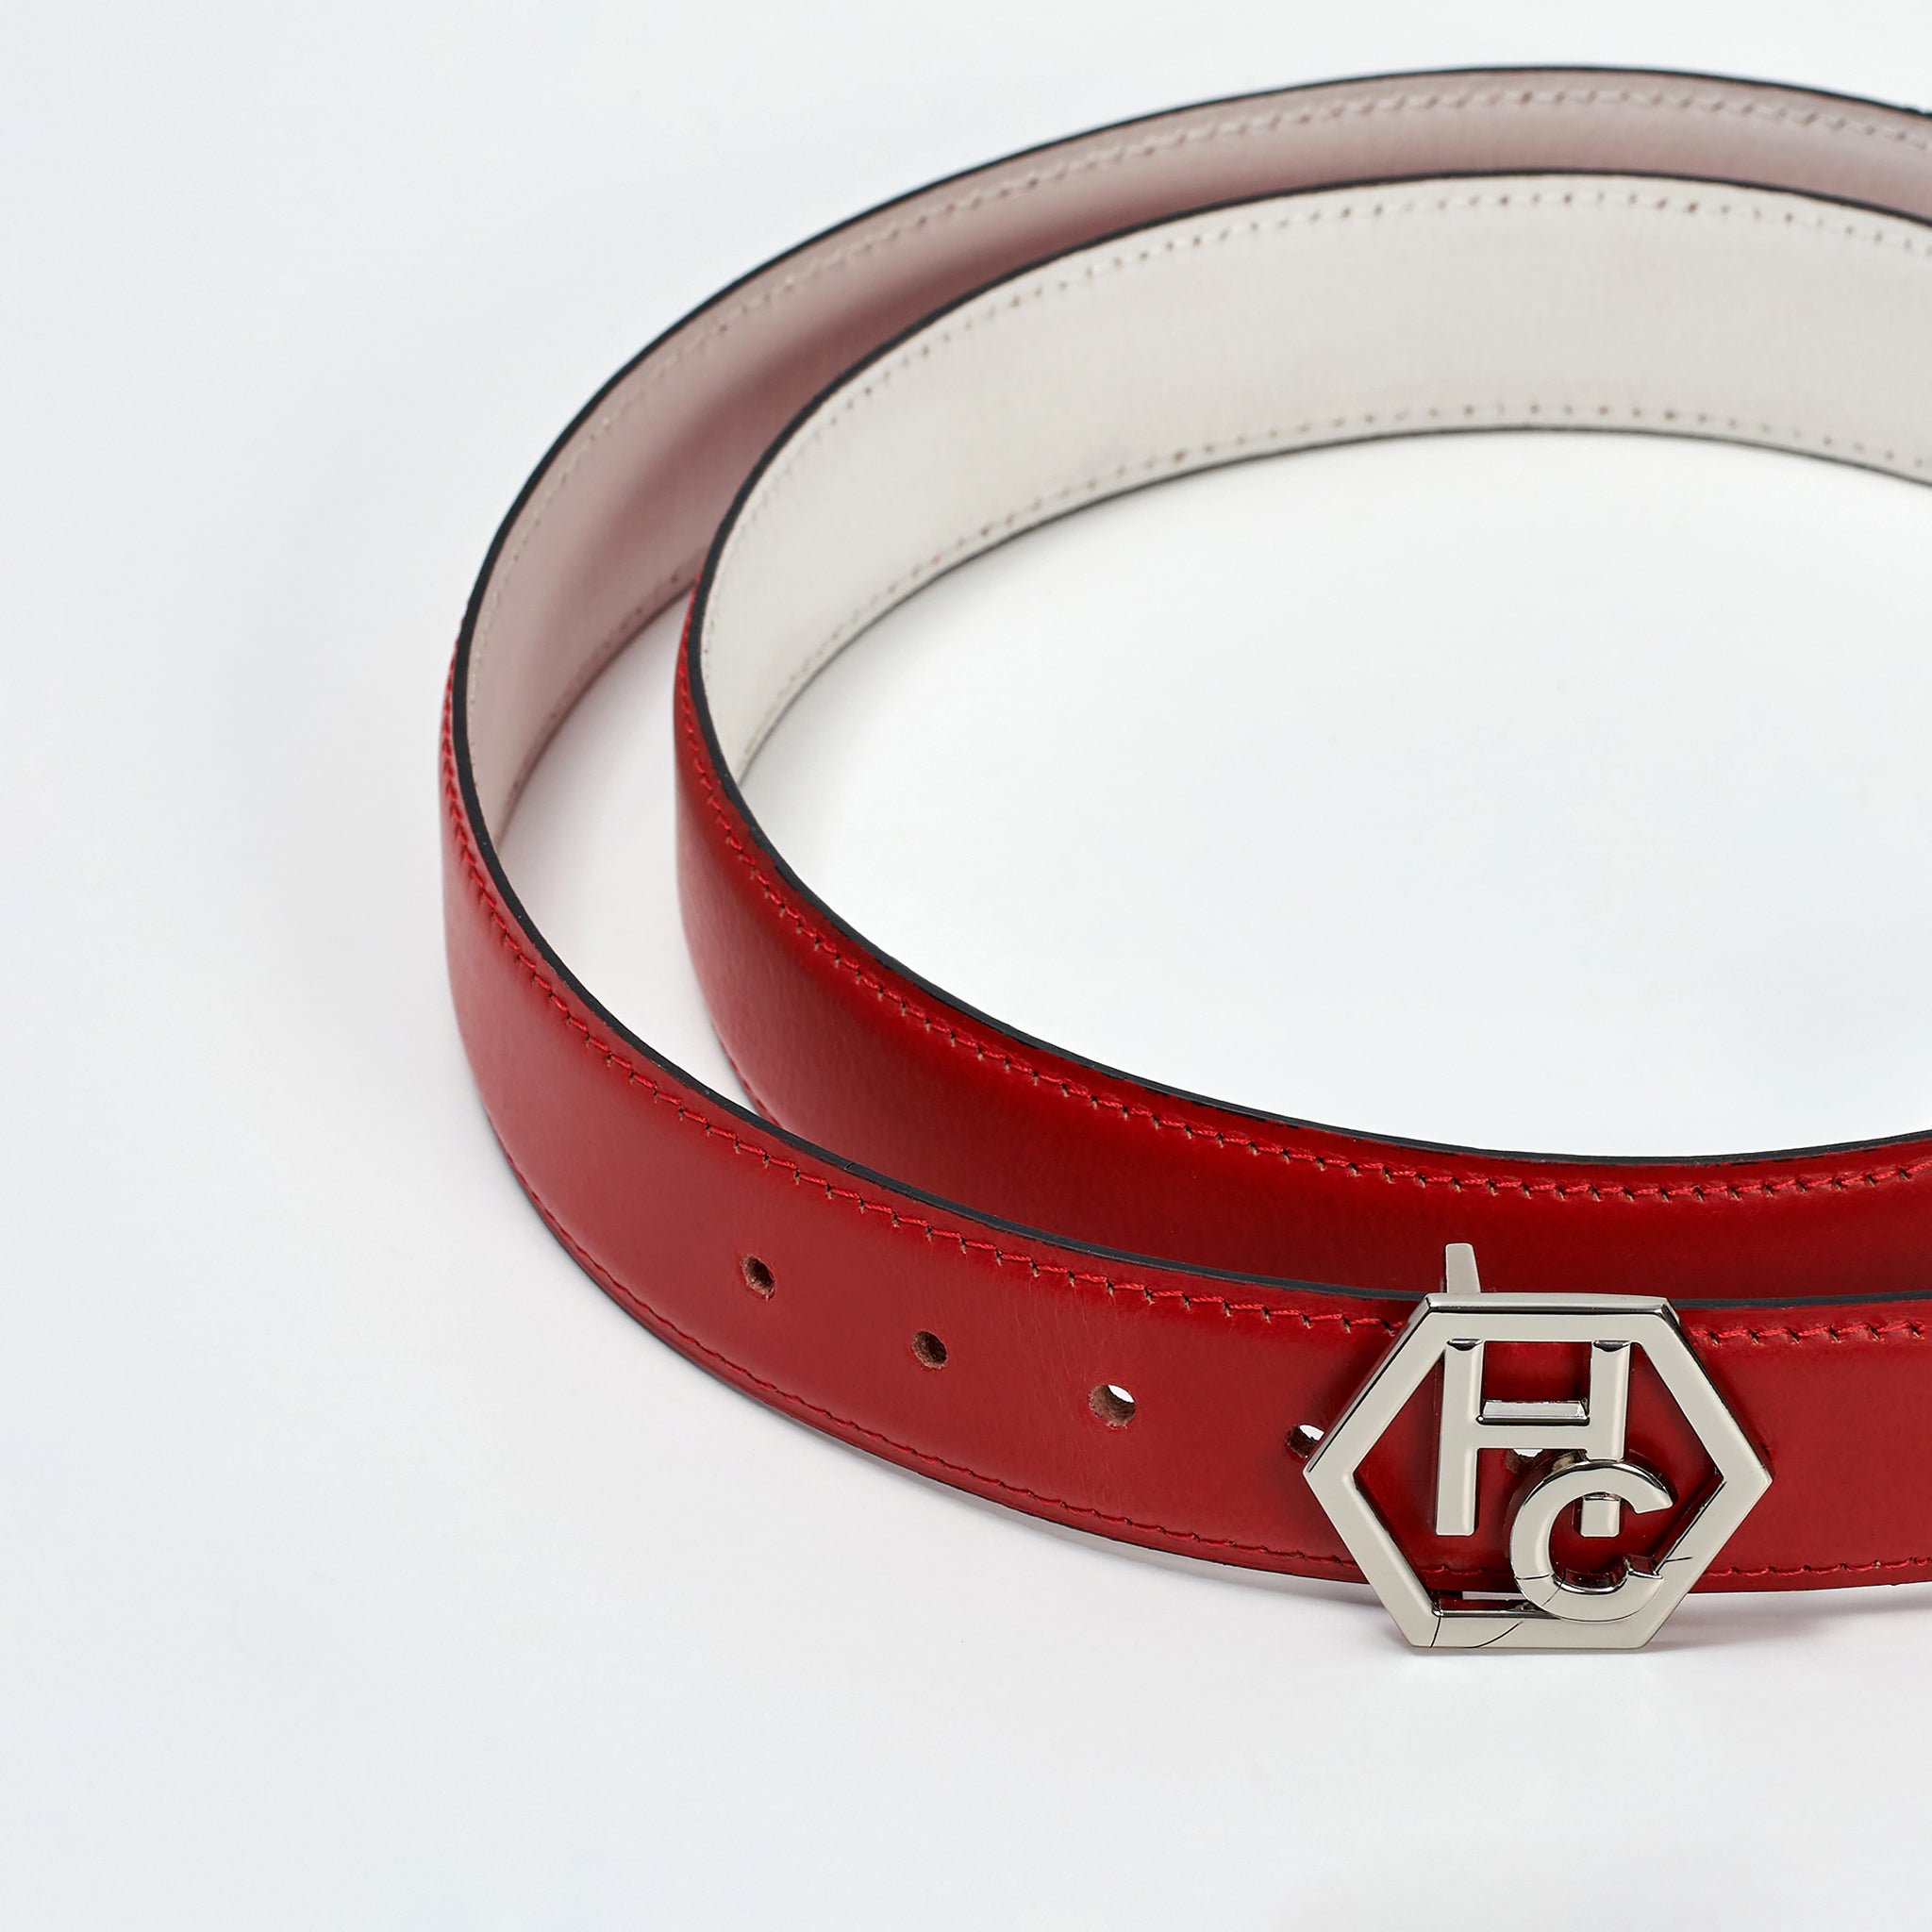 Hedonist Chicago Reversible Red Leather Belt 1.3" 32381073522839